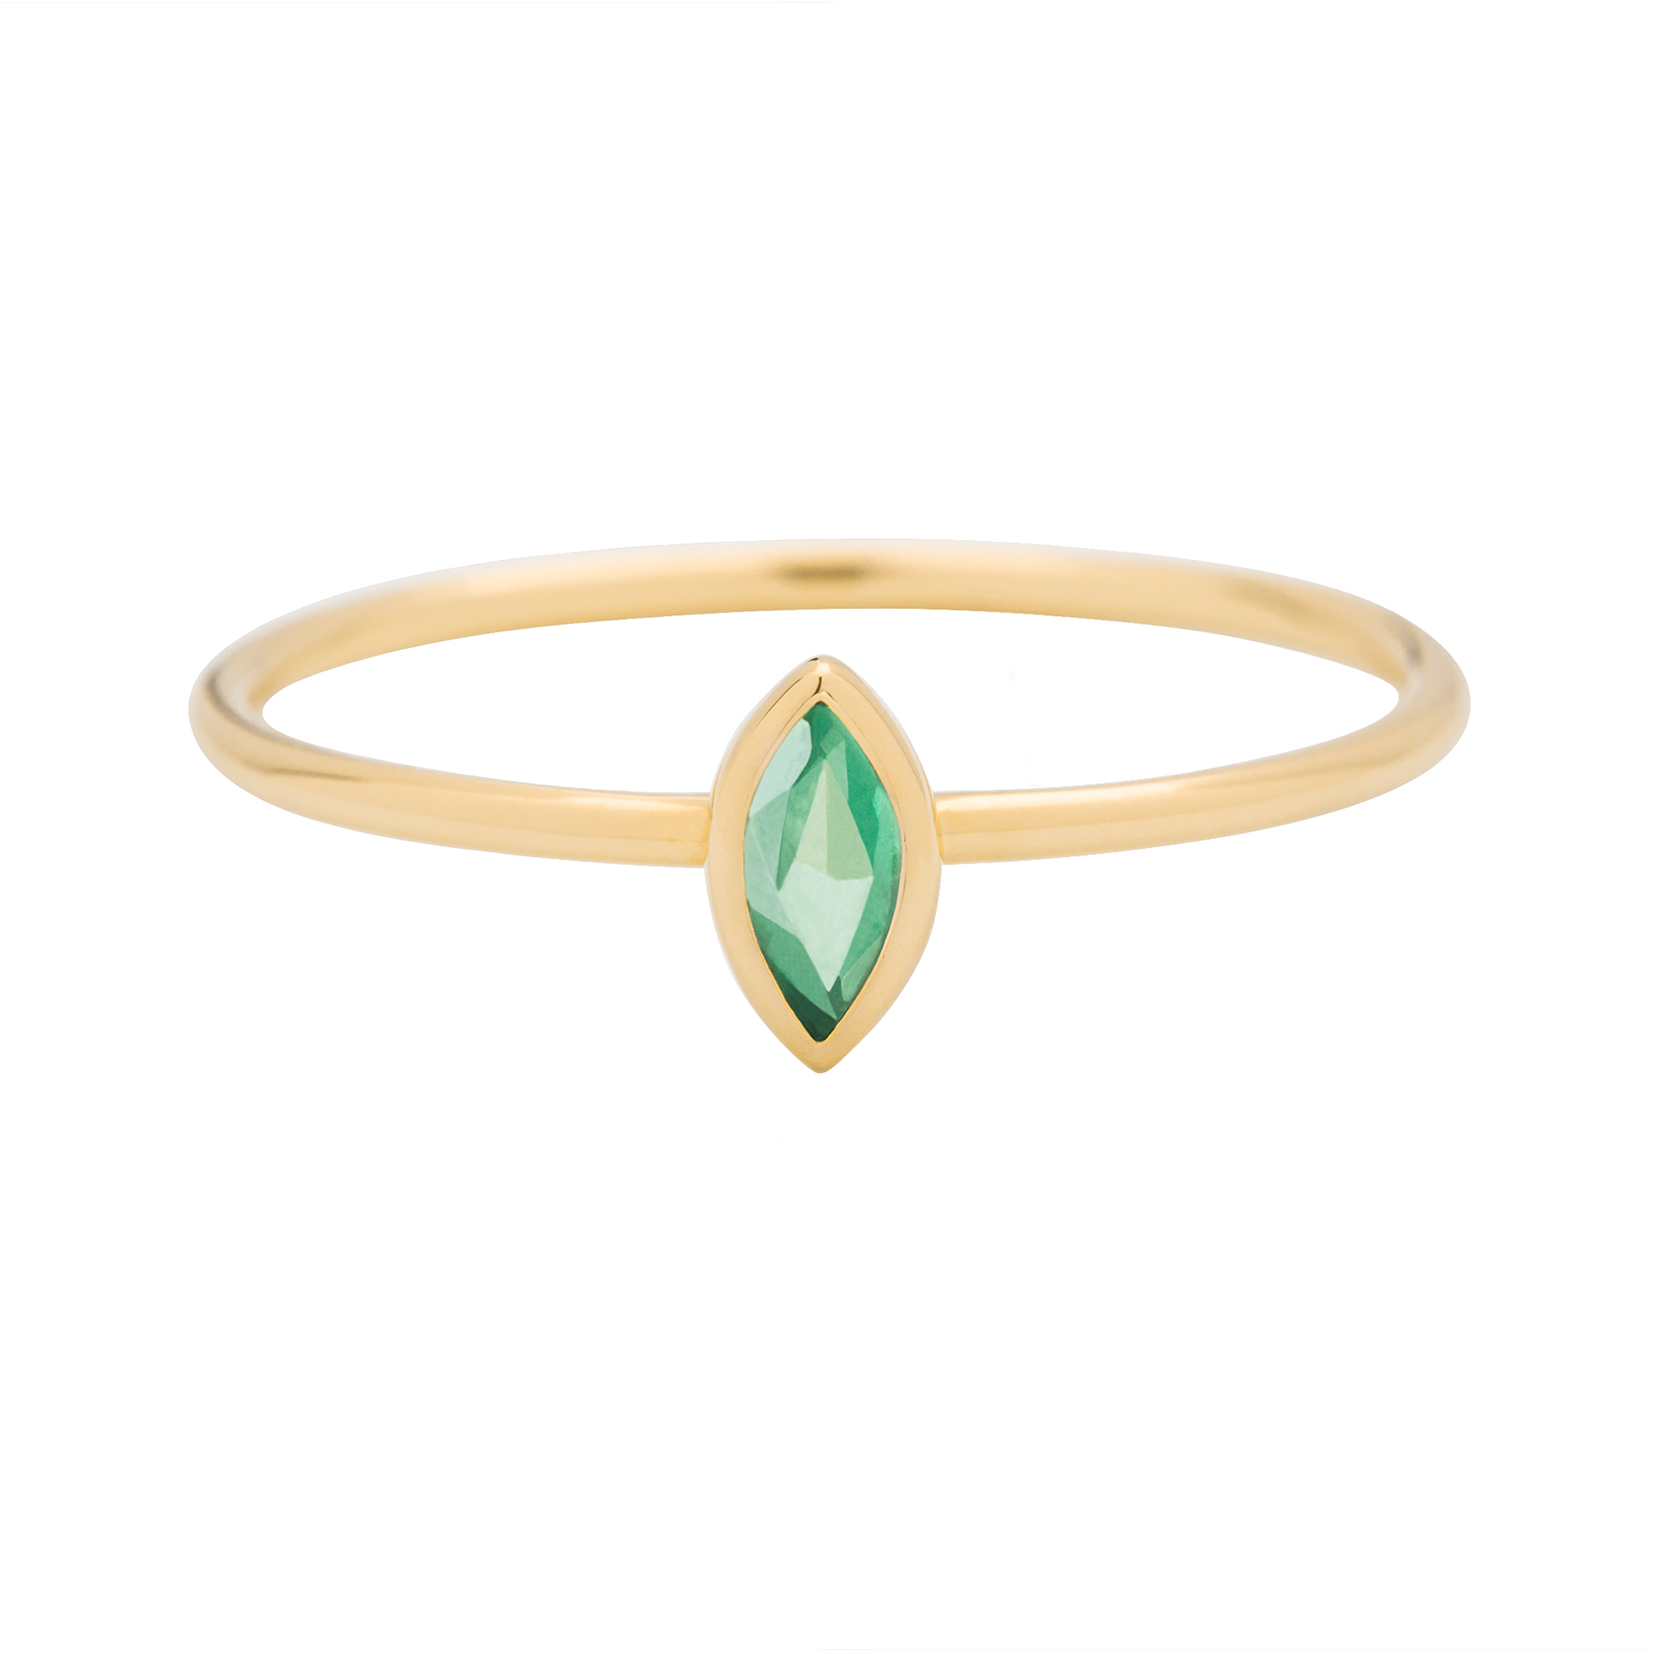 Metier by Tomfoolery: Emerald Stacking Rings